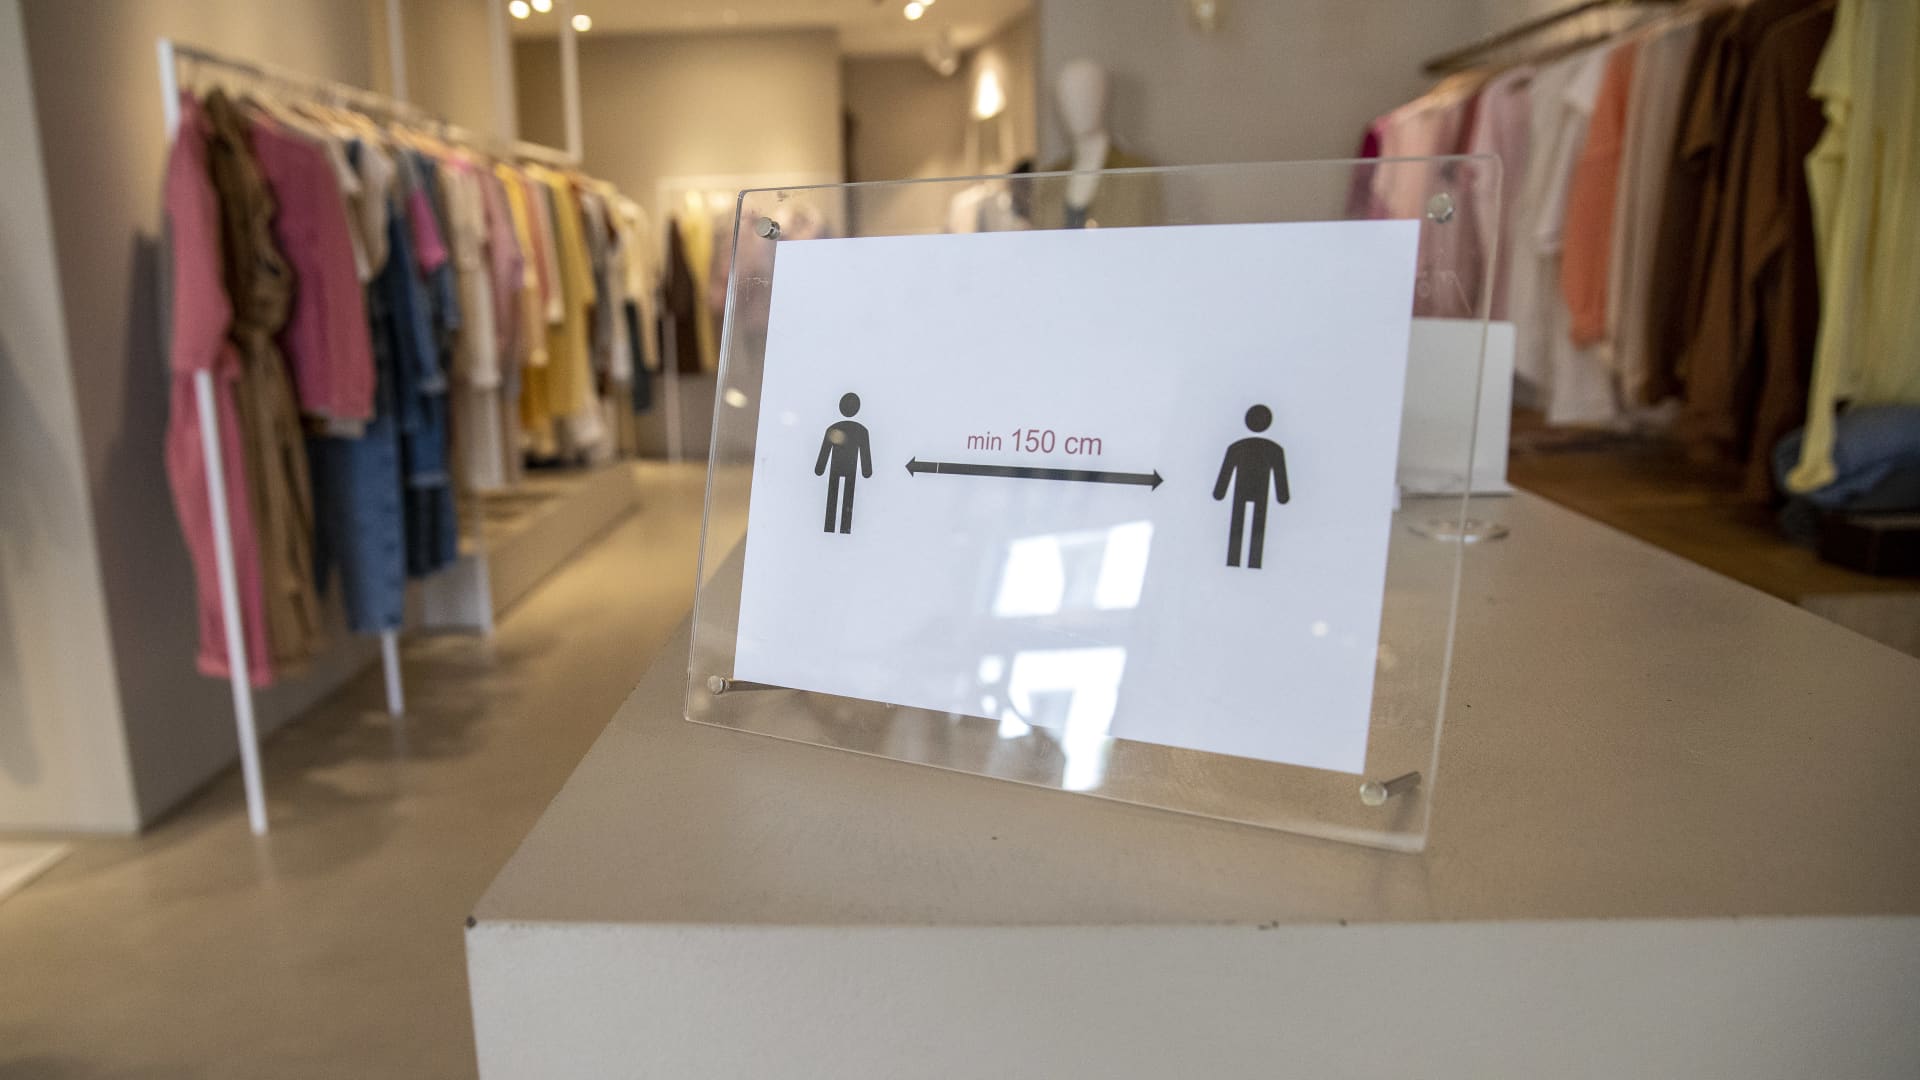 A sign that reminds clients to keep 1.5m distance in a clothes store as they open for the first time since March during the coronavirus (COVID-19) pandemic on April 22, 2020 in Berlin, Germany.